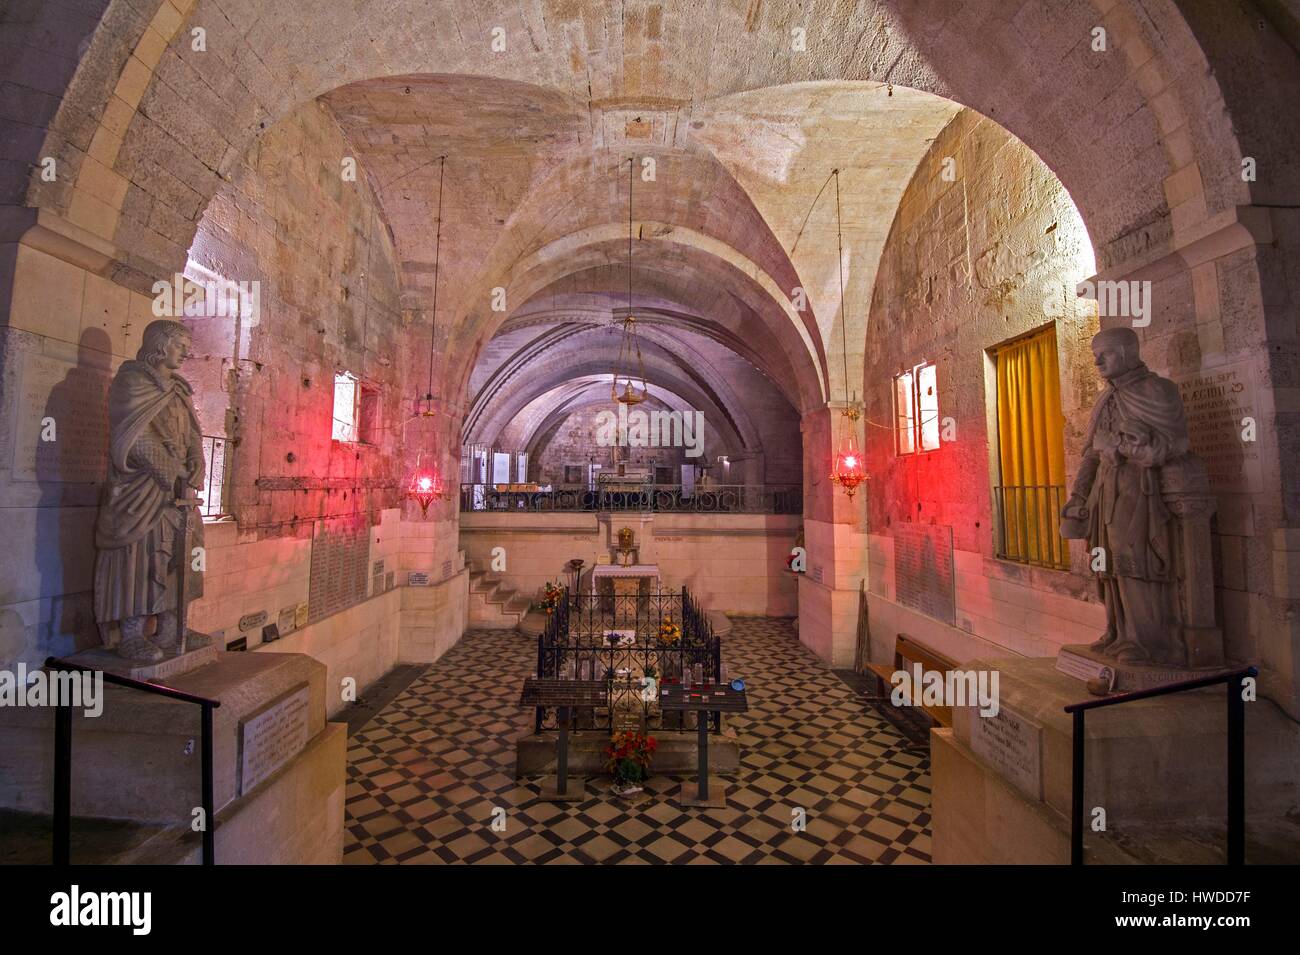 France, Gard, Saint Gilles du Gard, the Abbey of Saint Gilles listed as World Heritage by UNESCO, the crypt and the tomb of Saint Gilles du Gard Stock Photo